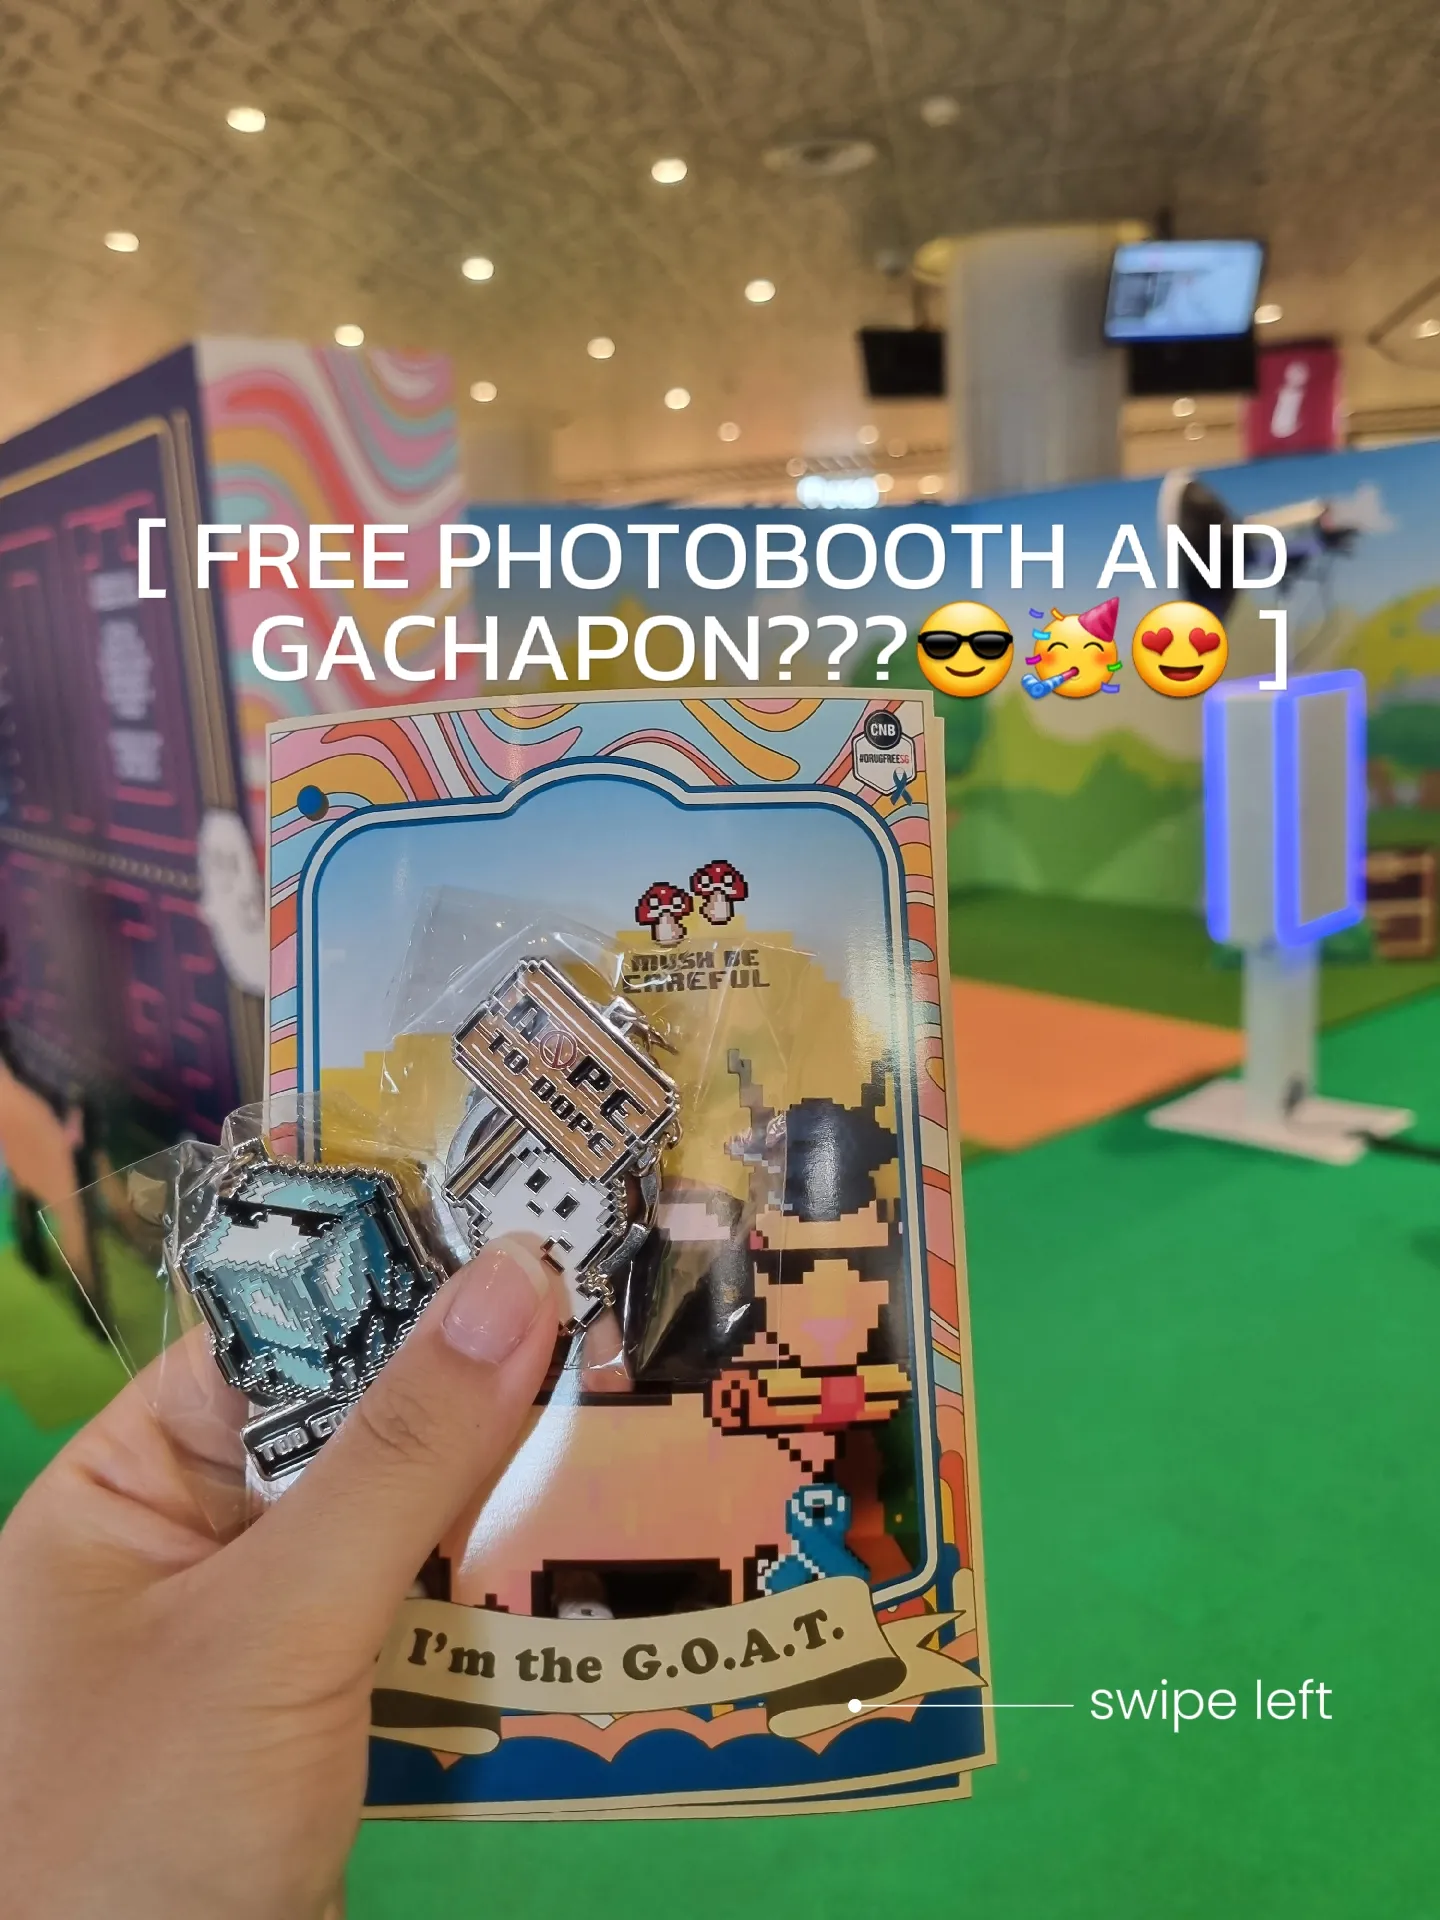 FREE PHOTOBOOTH & GACHAPON???🥳😍 things to do in sg's images